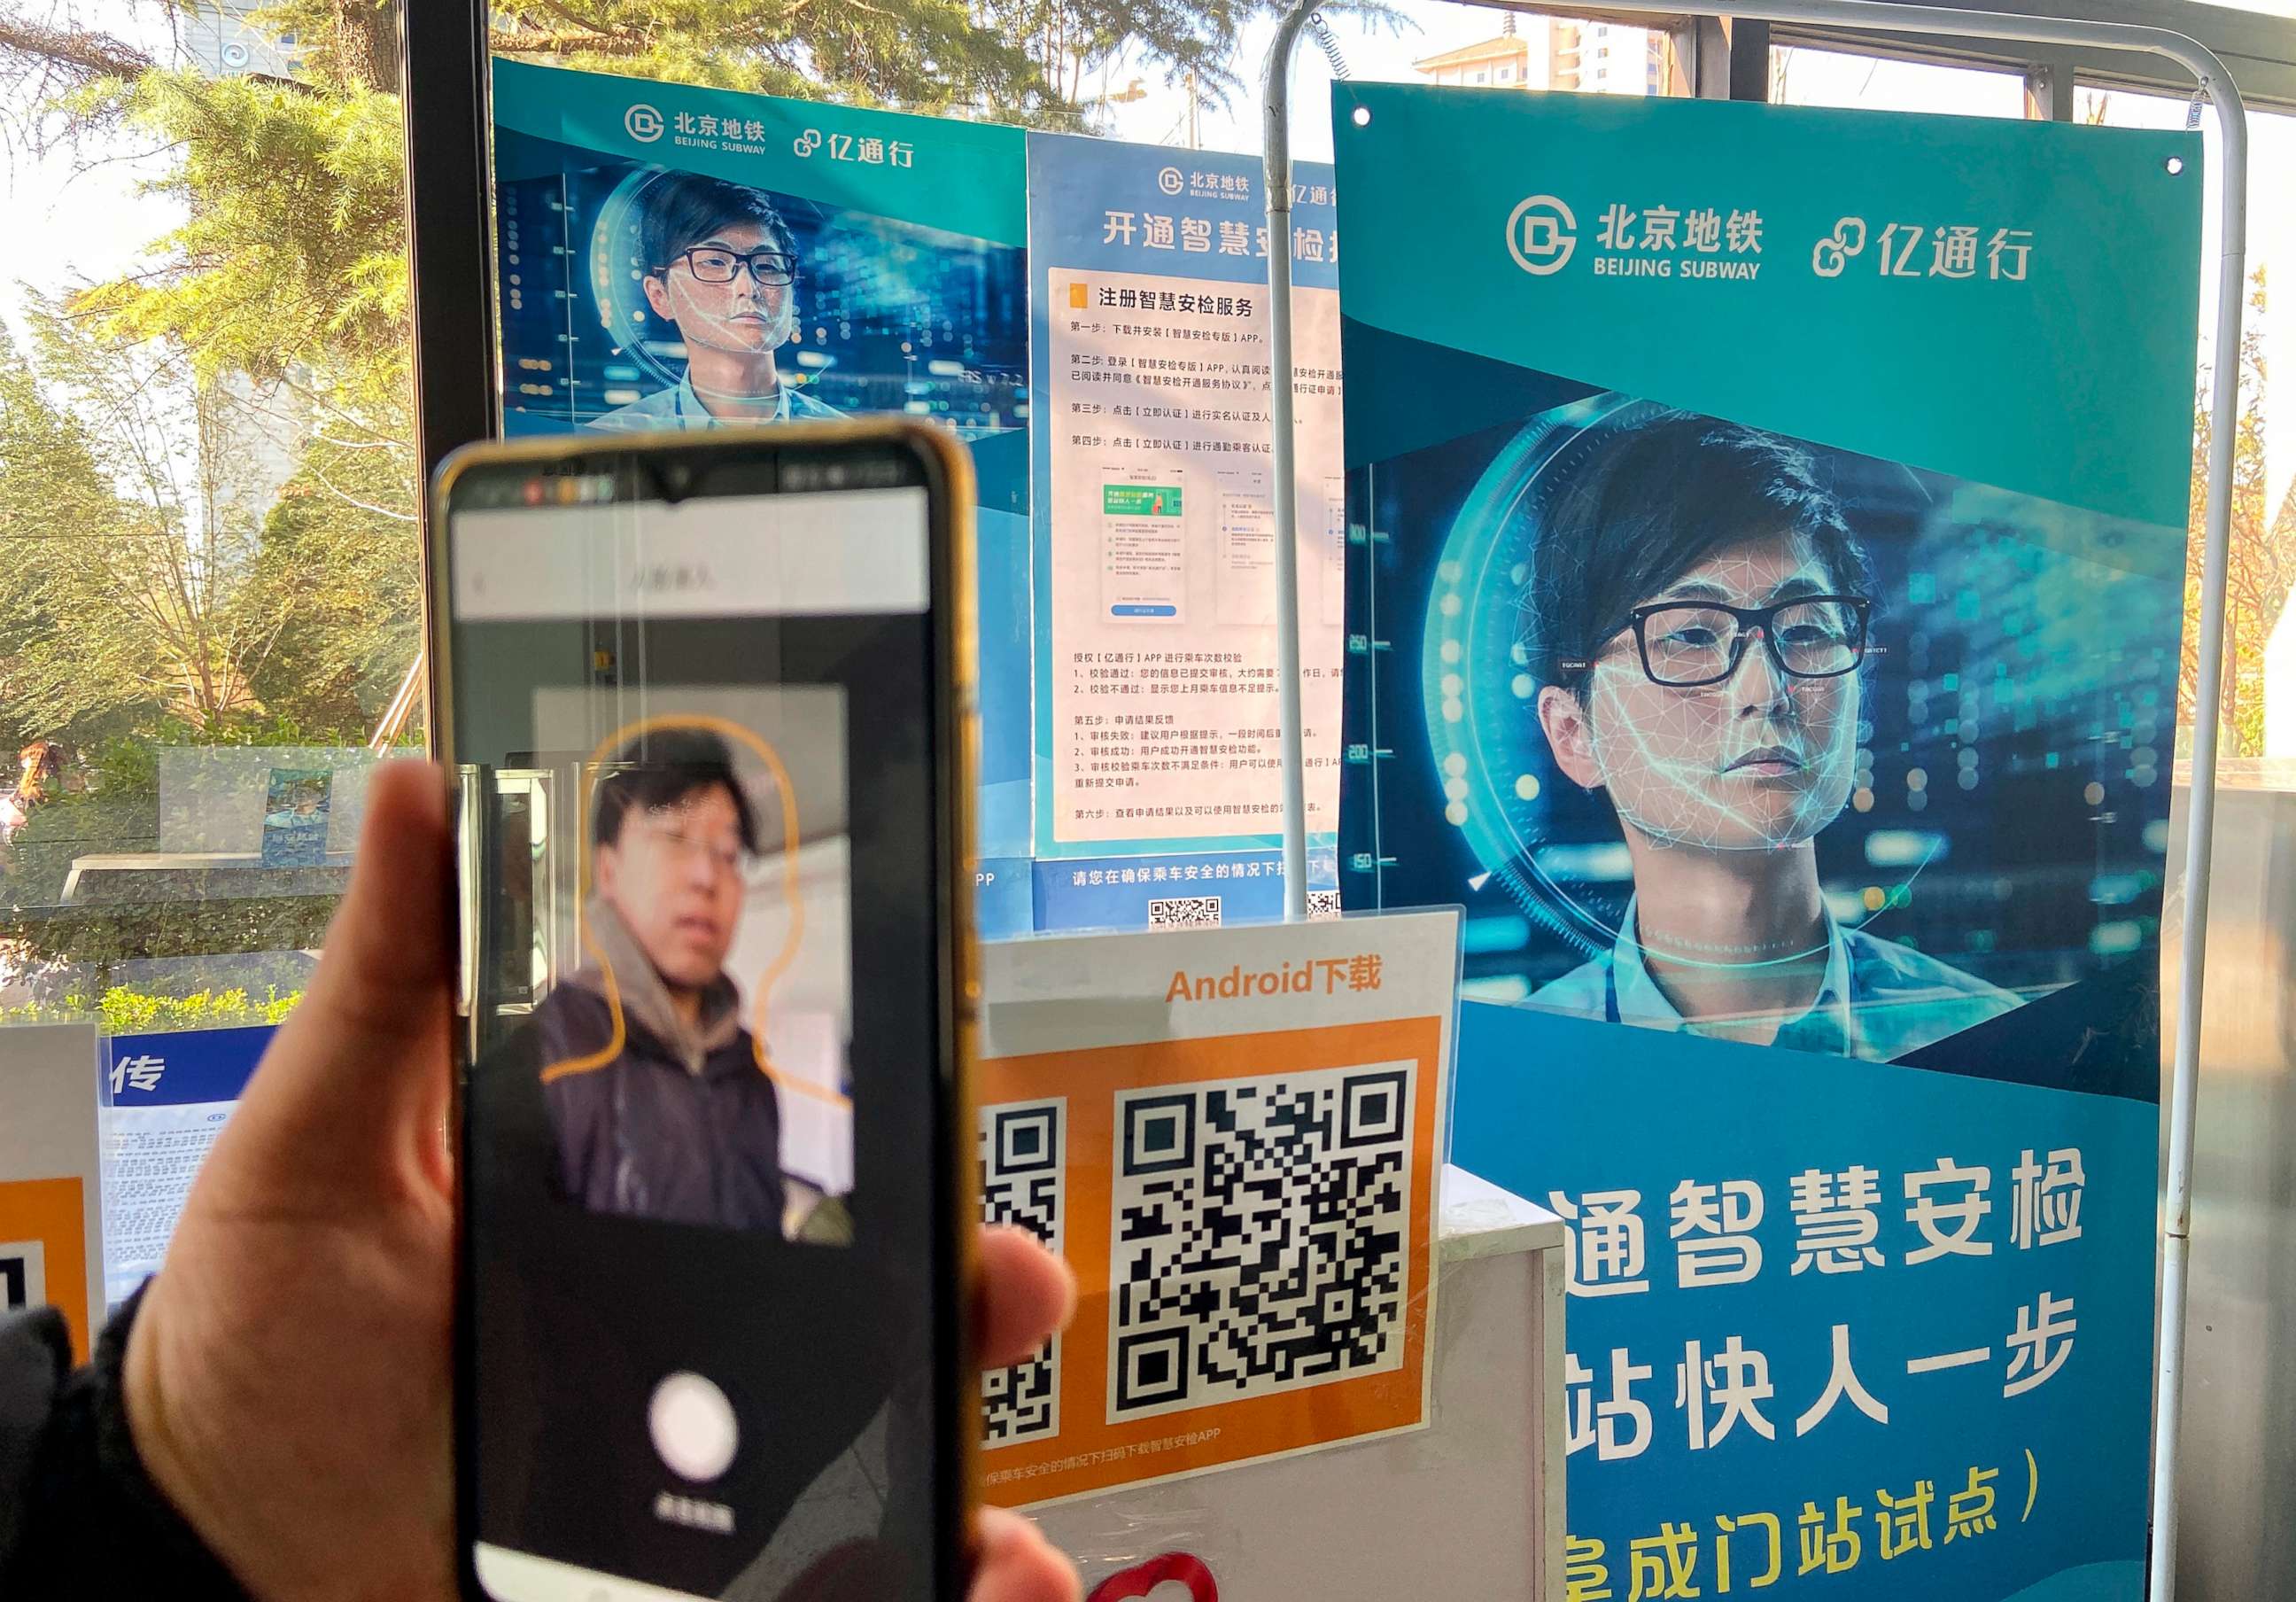 PHOTO: A person shows the facial recognition shown through the app at the Fuchengmen subway station in Beijing, China, Nov. 28, 2019.